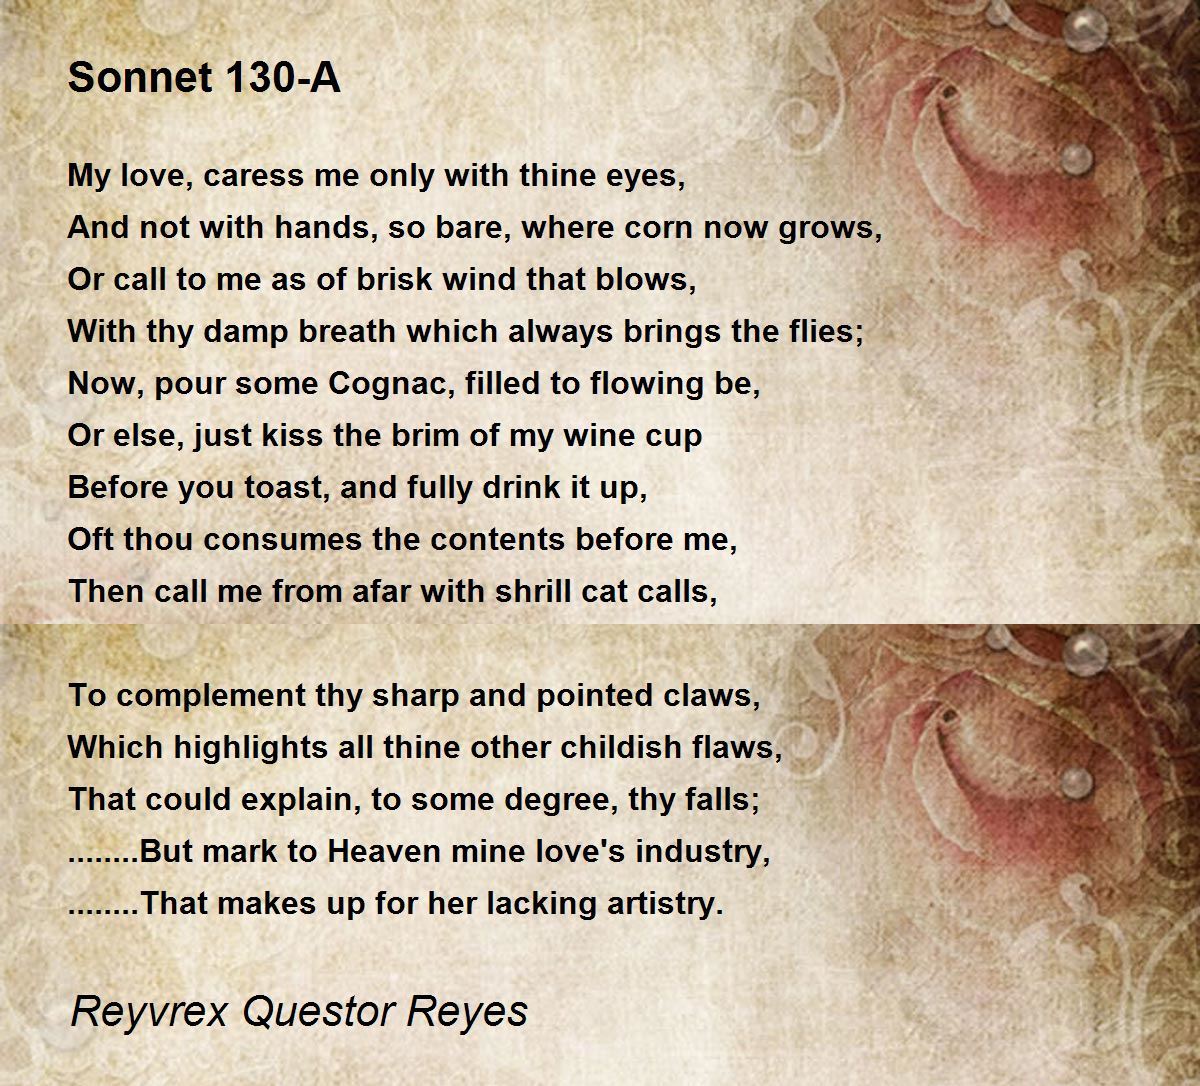 poetry essay on sonnet 130 250 words